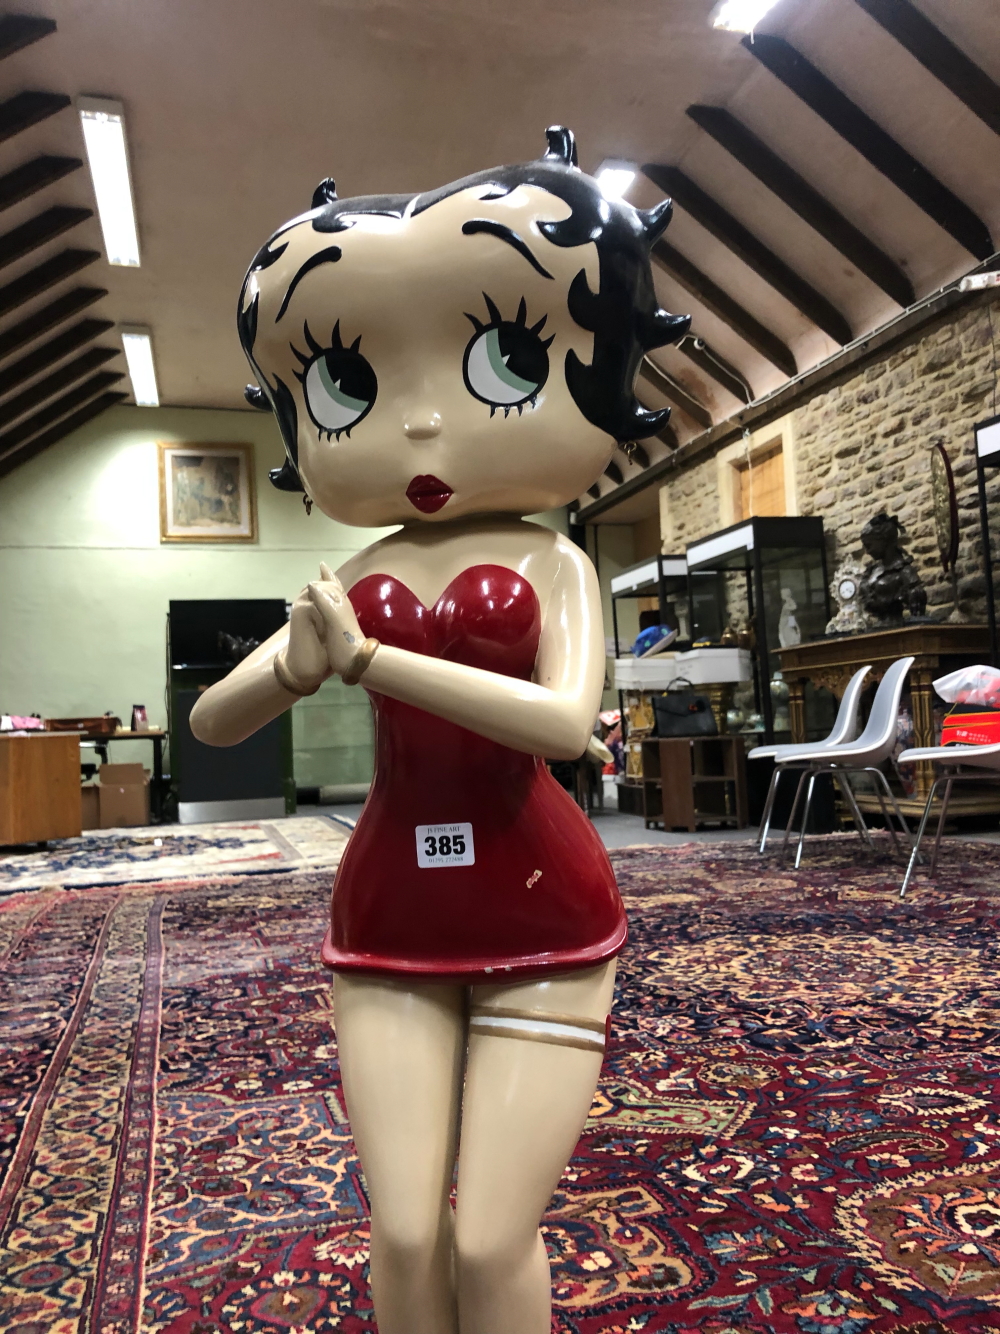 A 1999 KING FEATURES SYNDICATE FIGURE OF BETTY BOOP STANDING WITH HANDS CLASPED WEARING A RED - Image 3 of 6